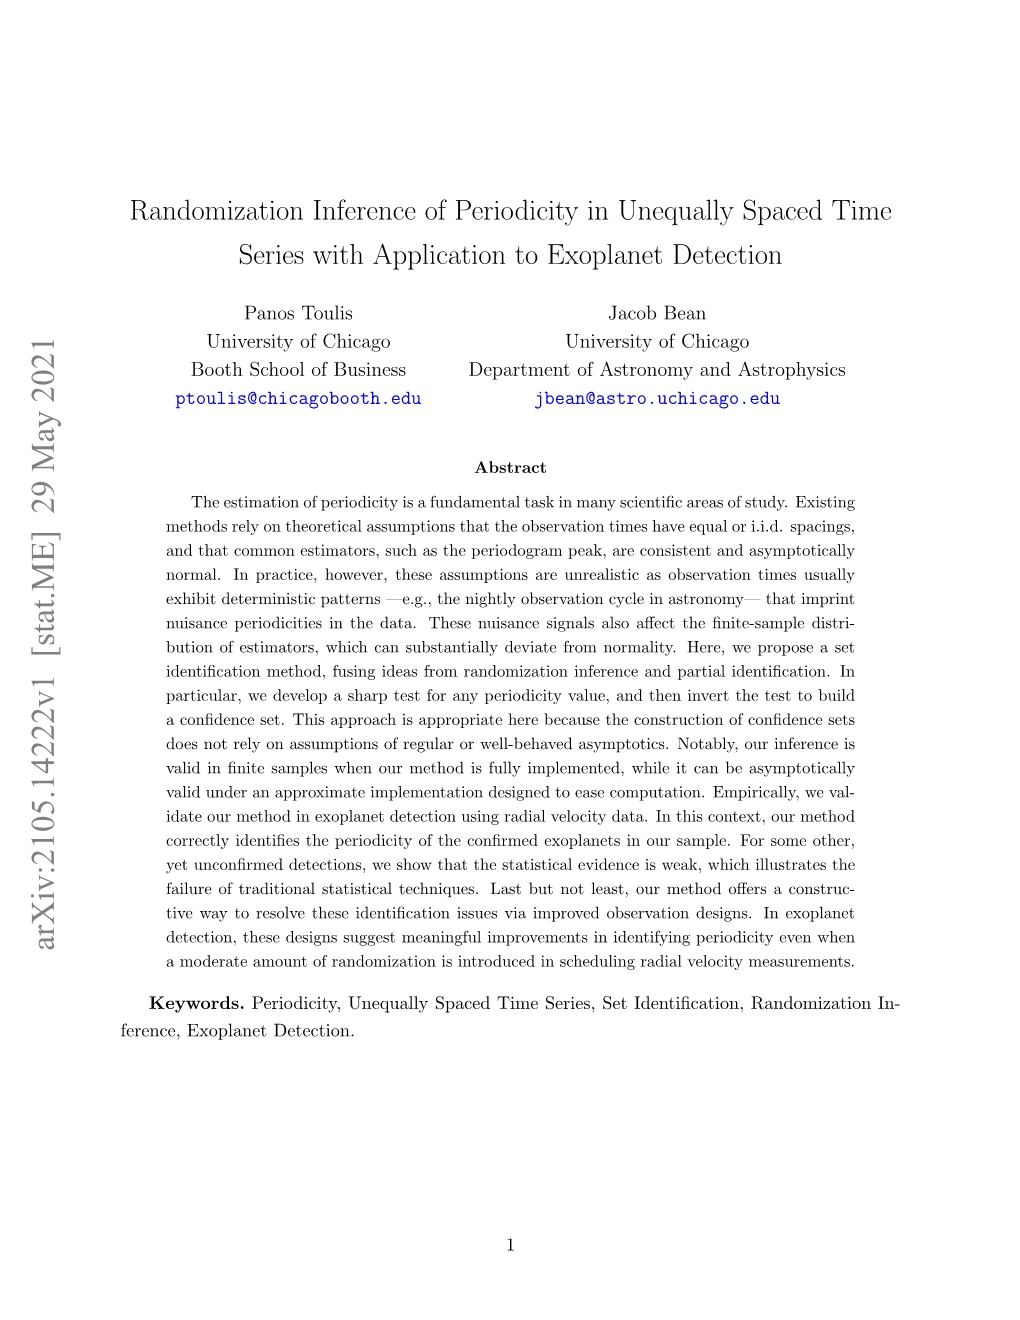 Randomization Inference of Periodicity in Unequally Spaced Time Series with Application to Exoplanet Detection